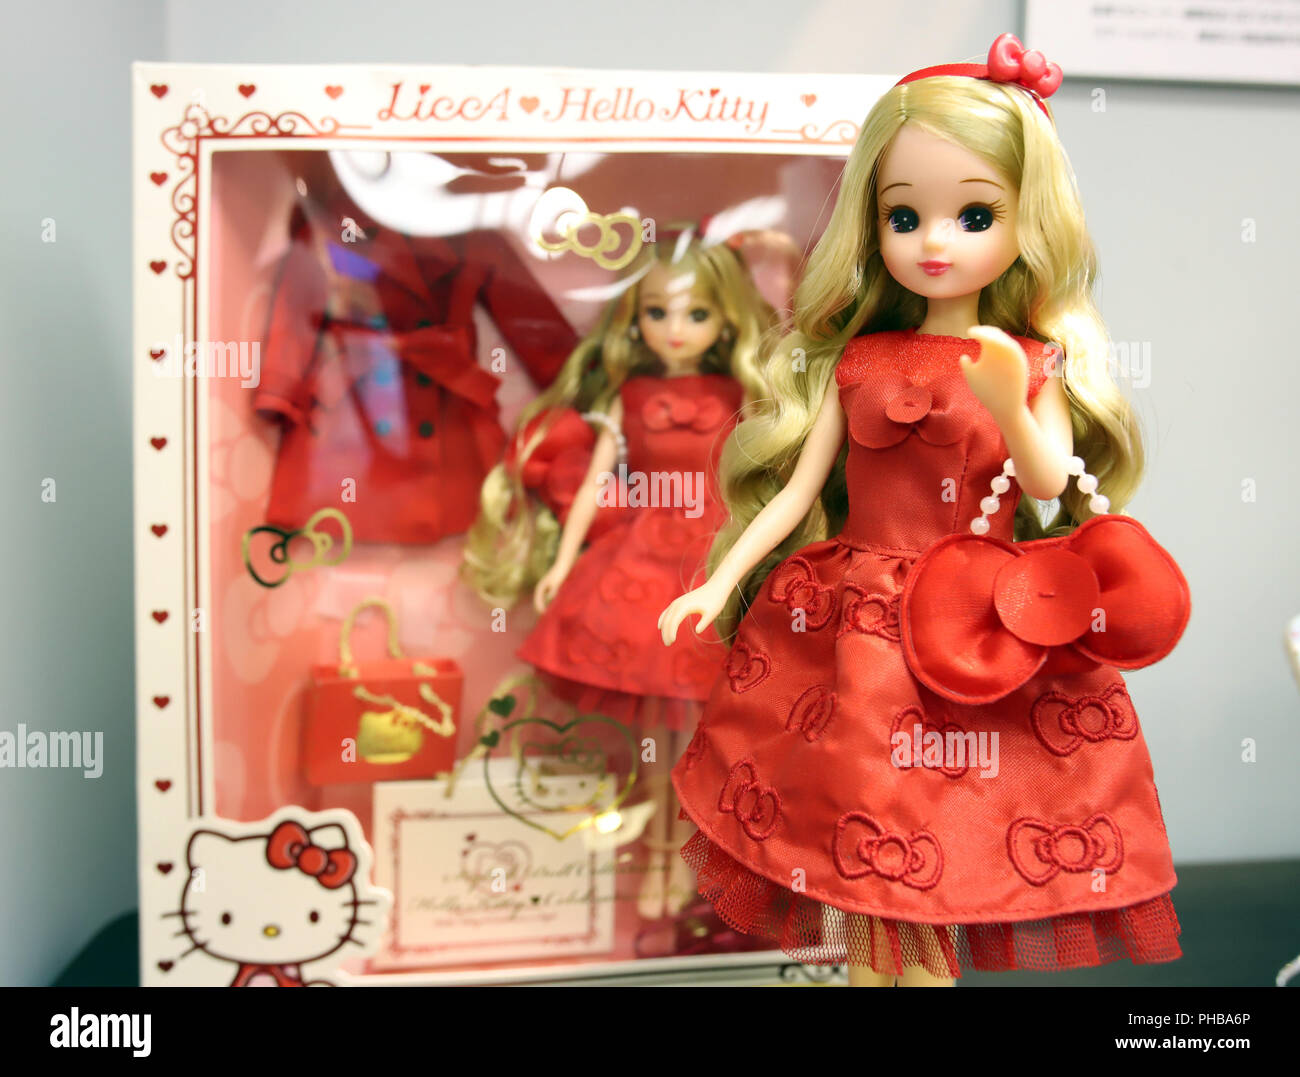 Takara Tomy Licca Hello Kitty Celebration Style Doll Collection From JAPAN